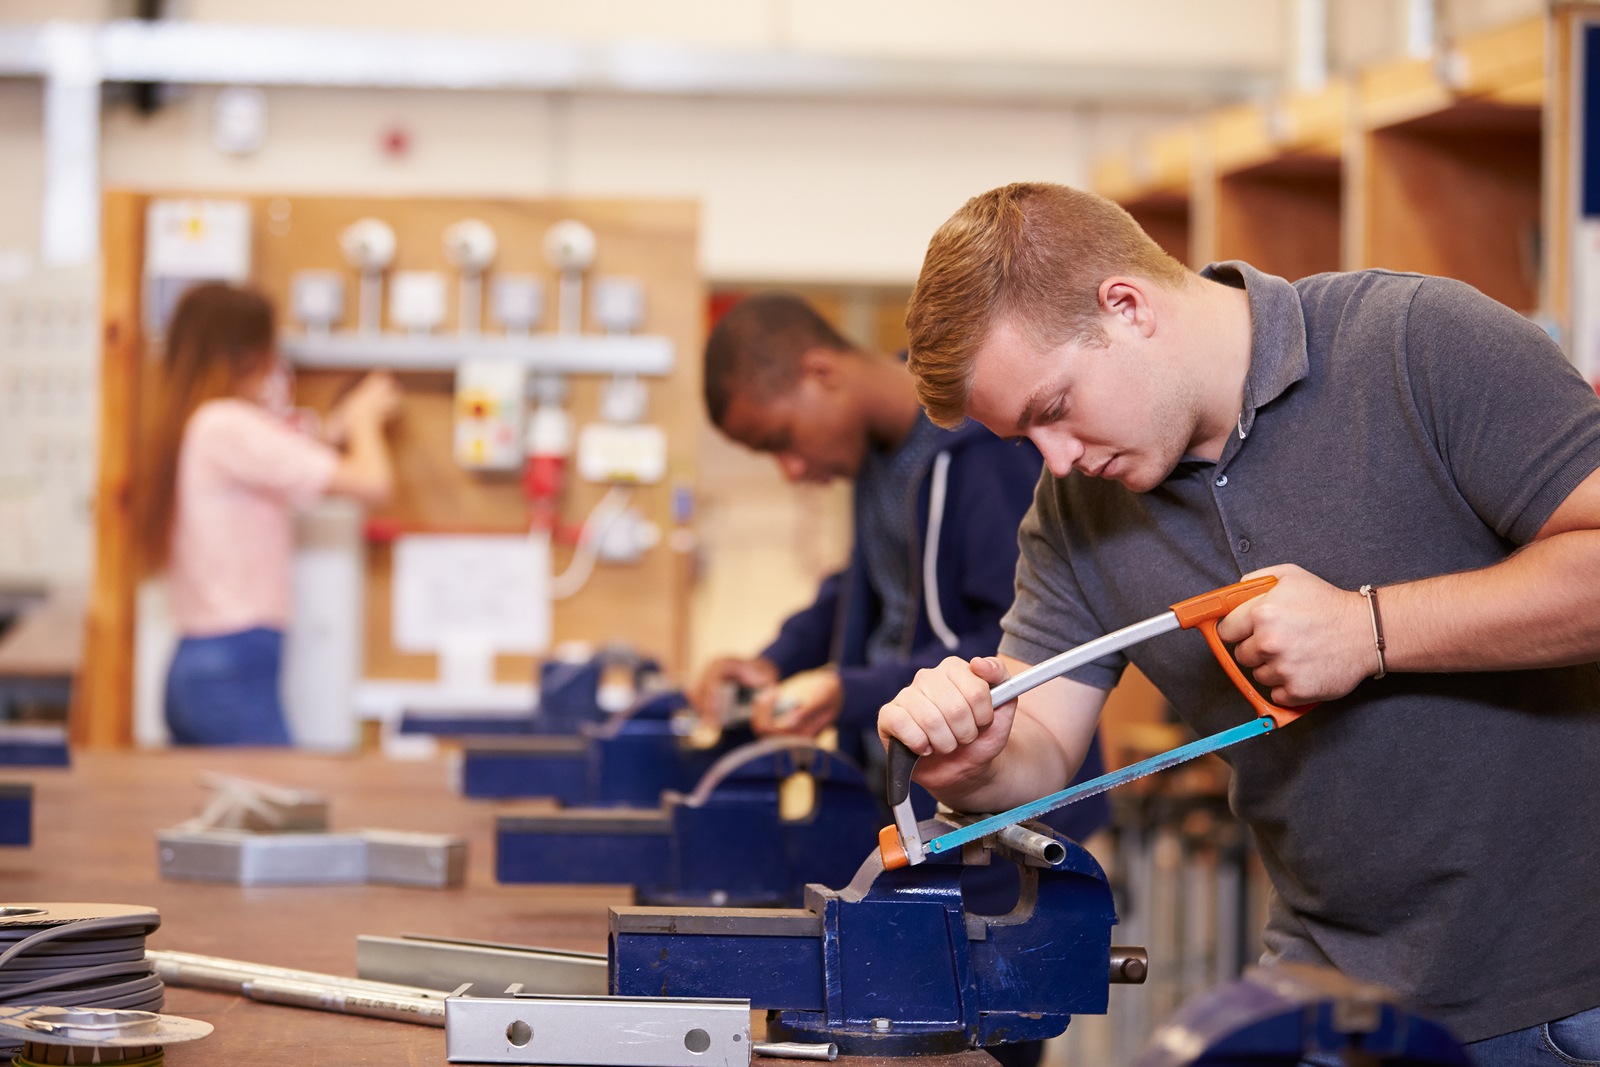 Becoming an Electrician with Apprenticeship Training